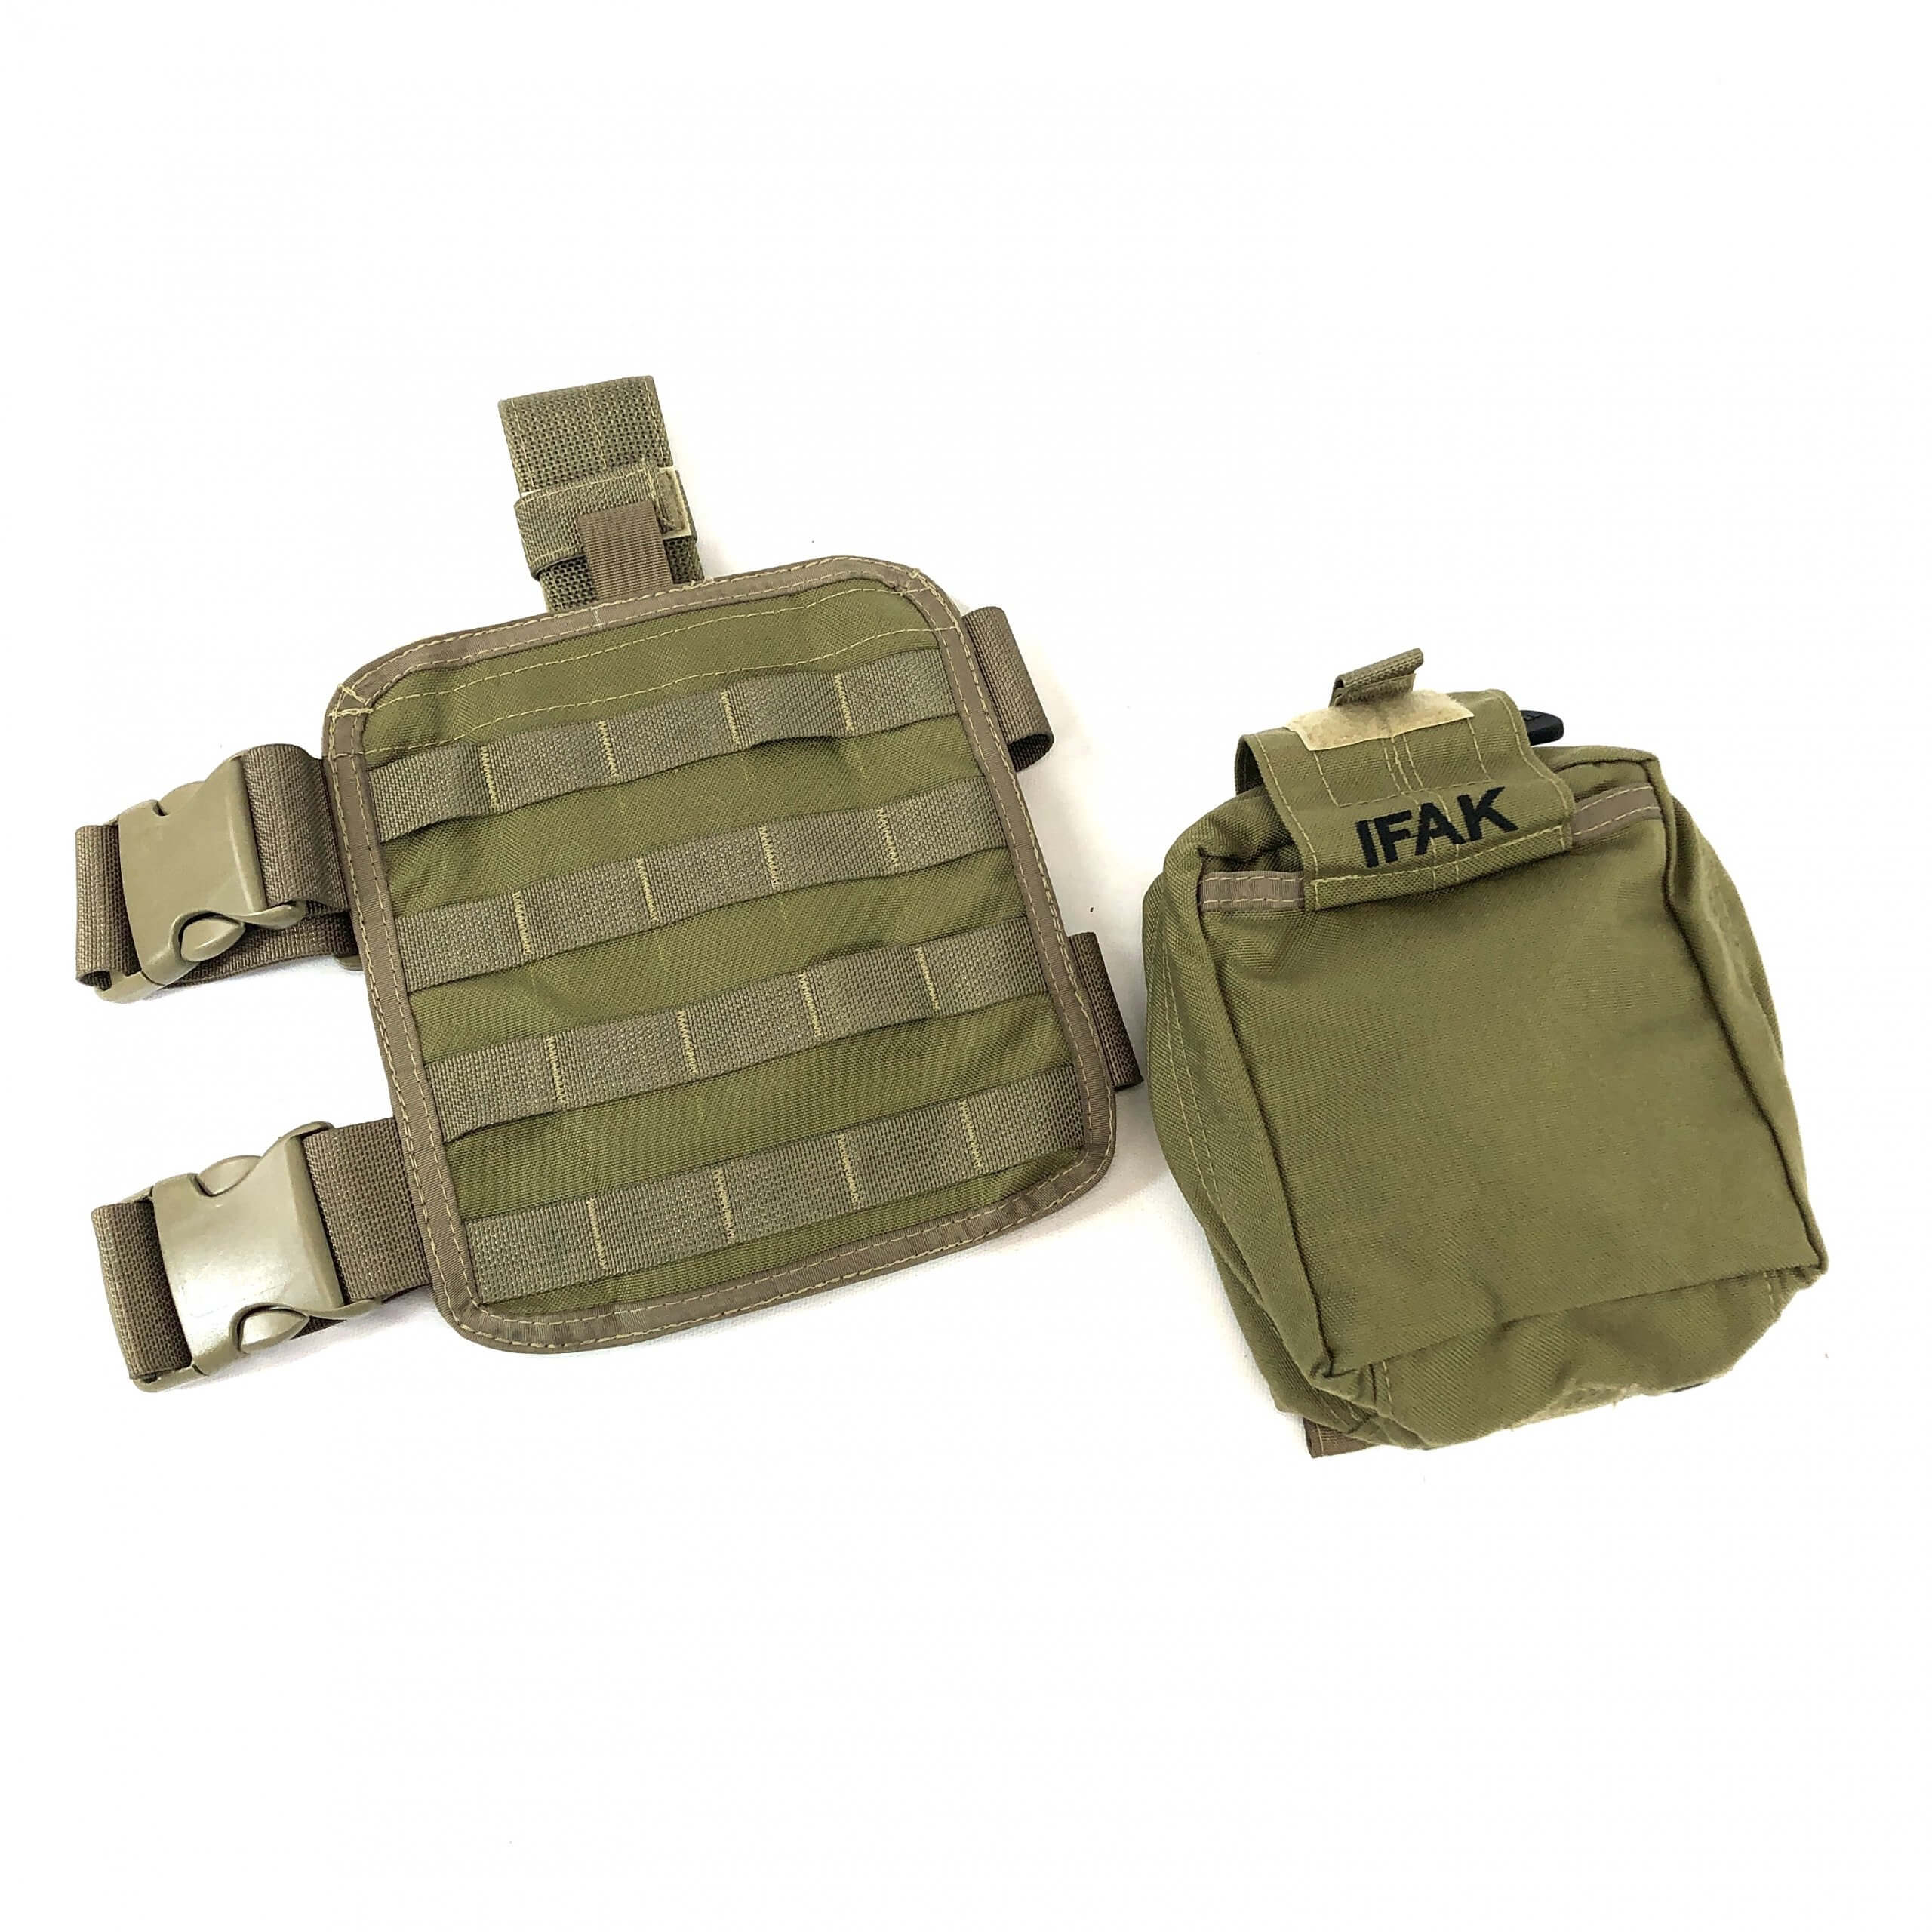 NEW COYOTE BROWN SOTECH IFAK POUCH  AND DROP LEG PLATFORM  MOLLE 